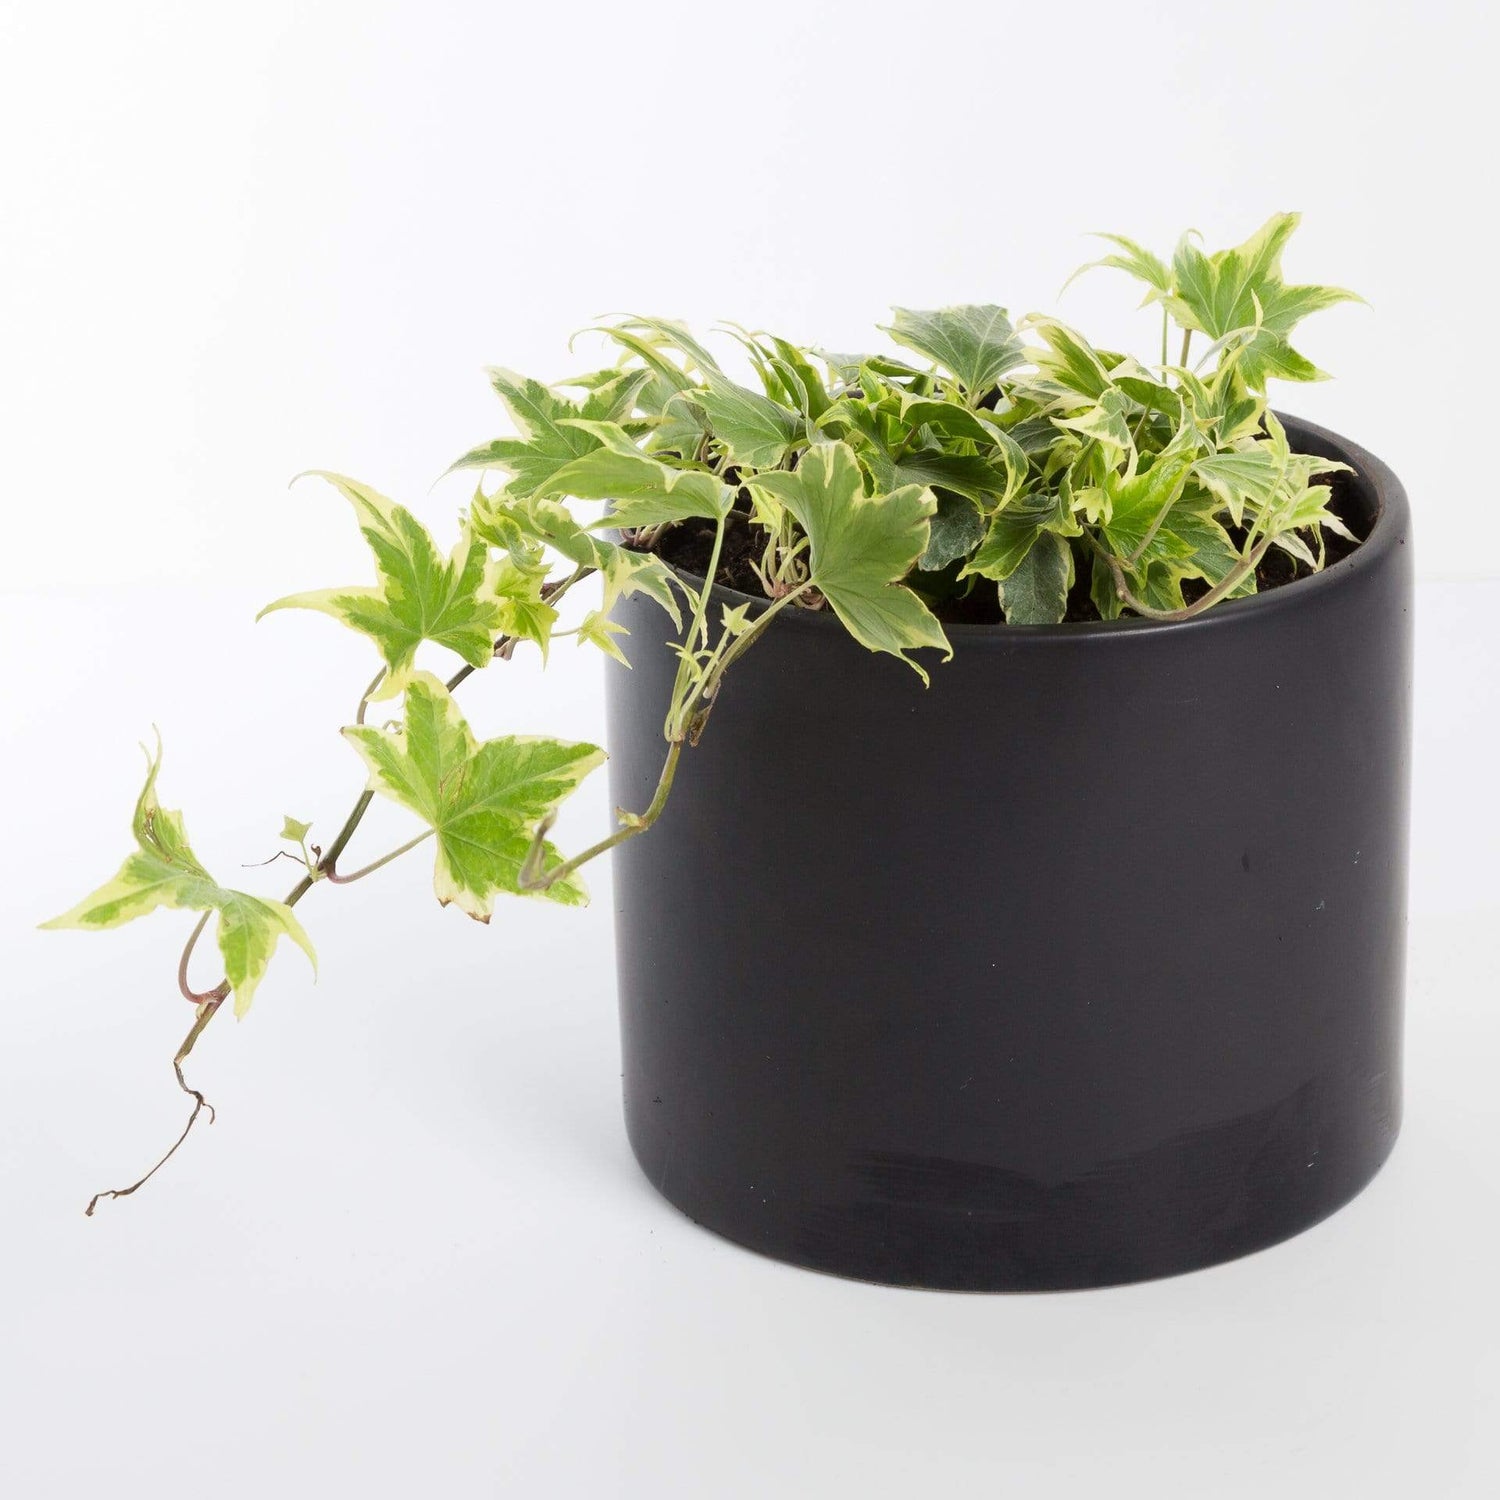 Urban Sprouts Plant 4" in nursery pot English Ivy 'Lauren's Lace'